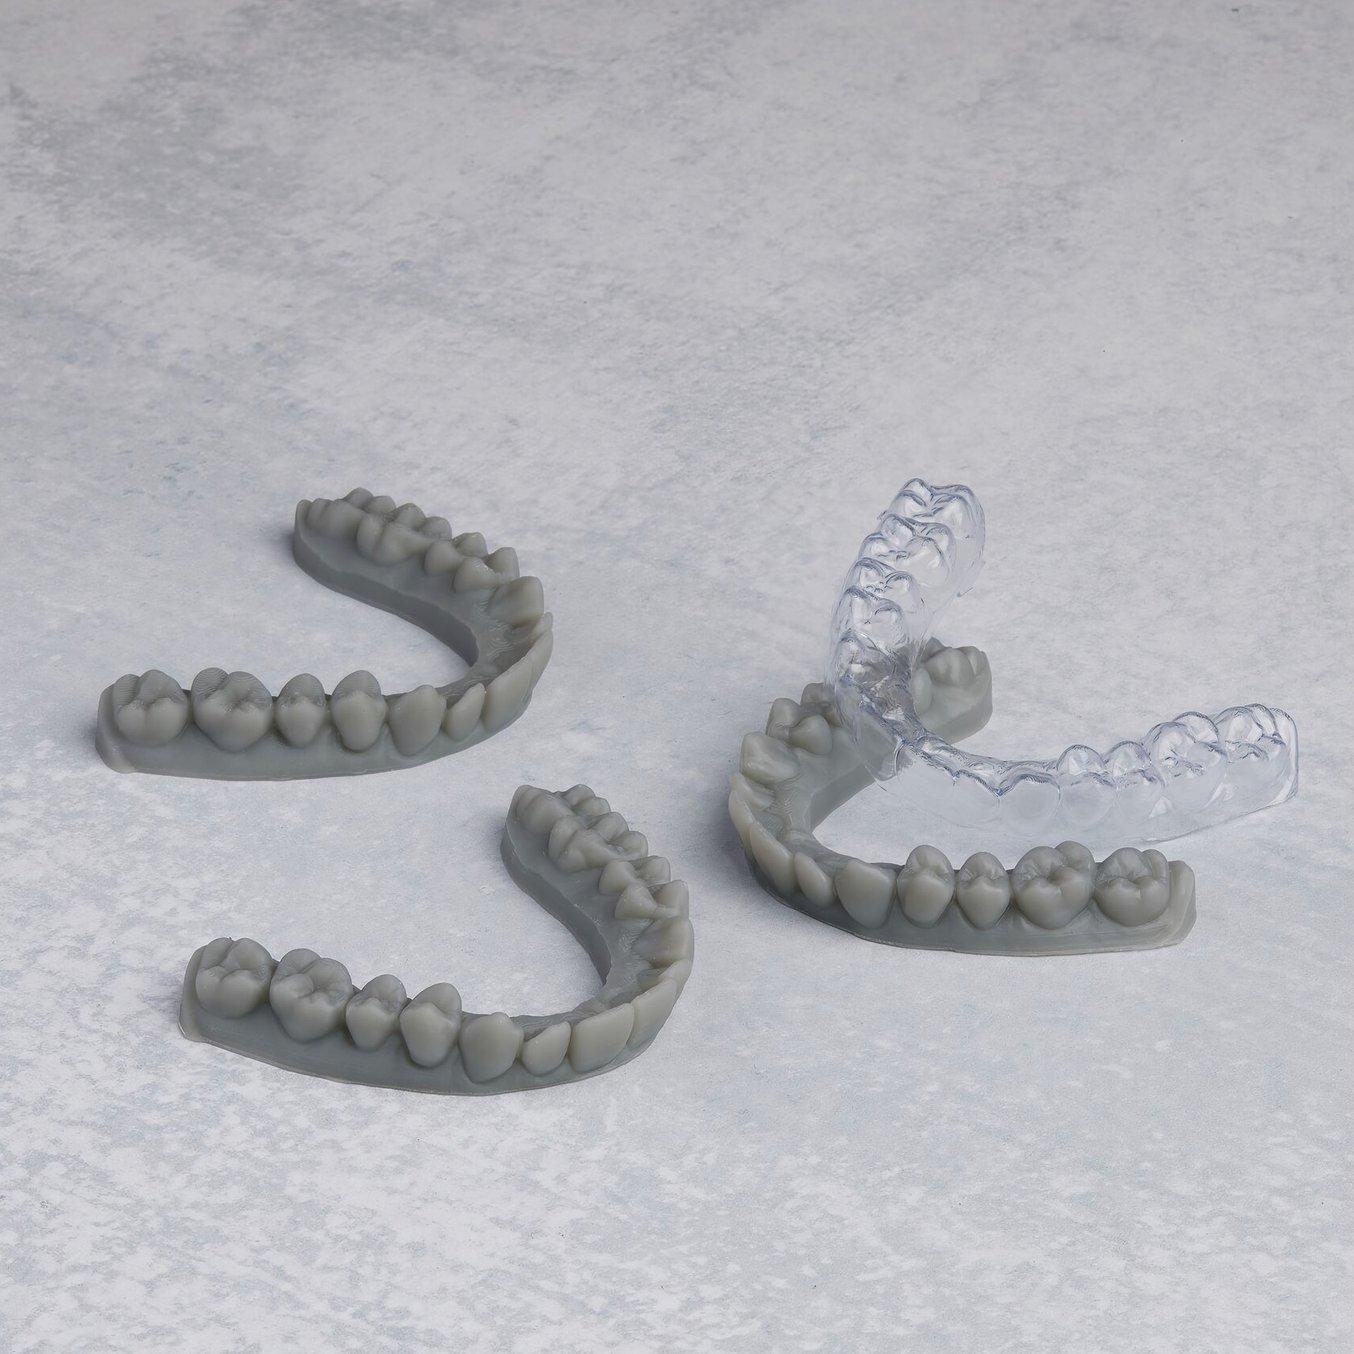 grey, 3D printed models and thermoformed clear aligners